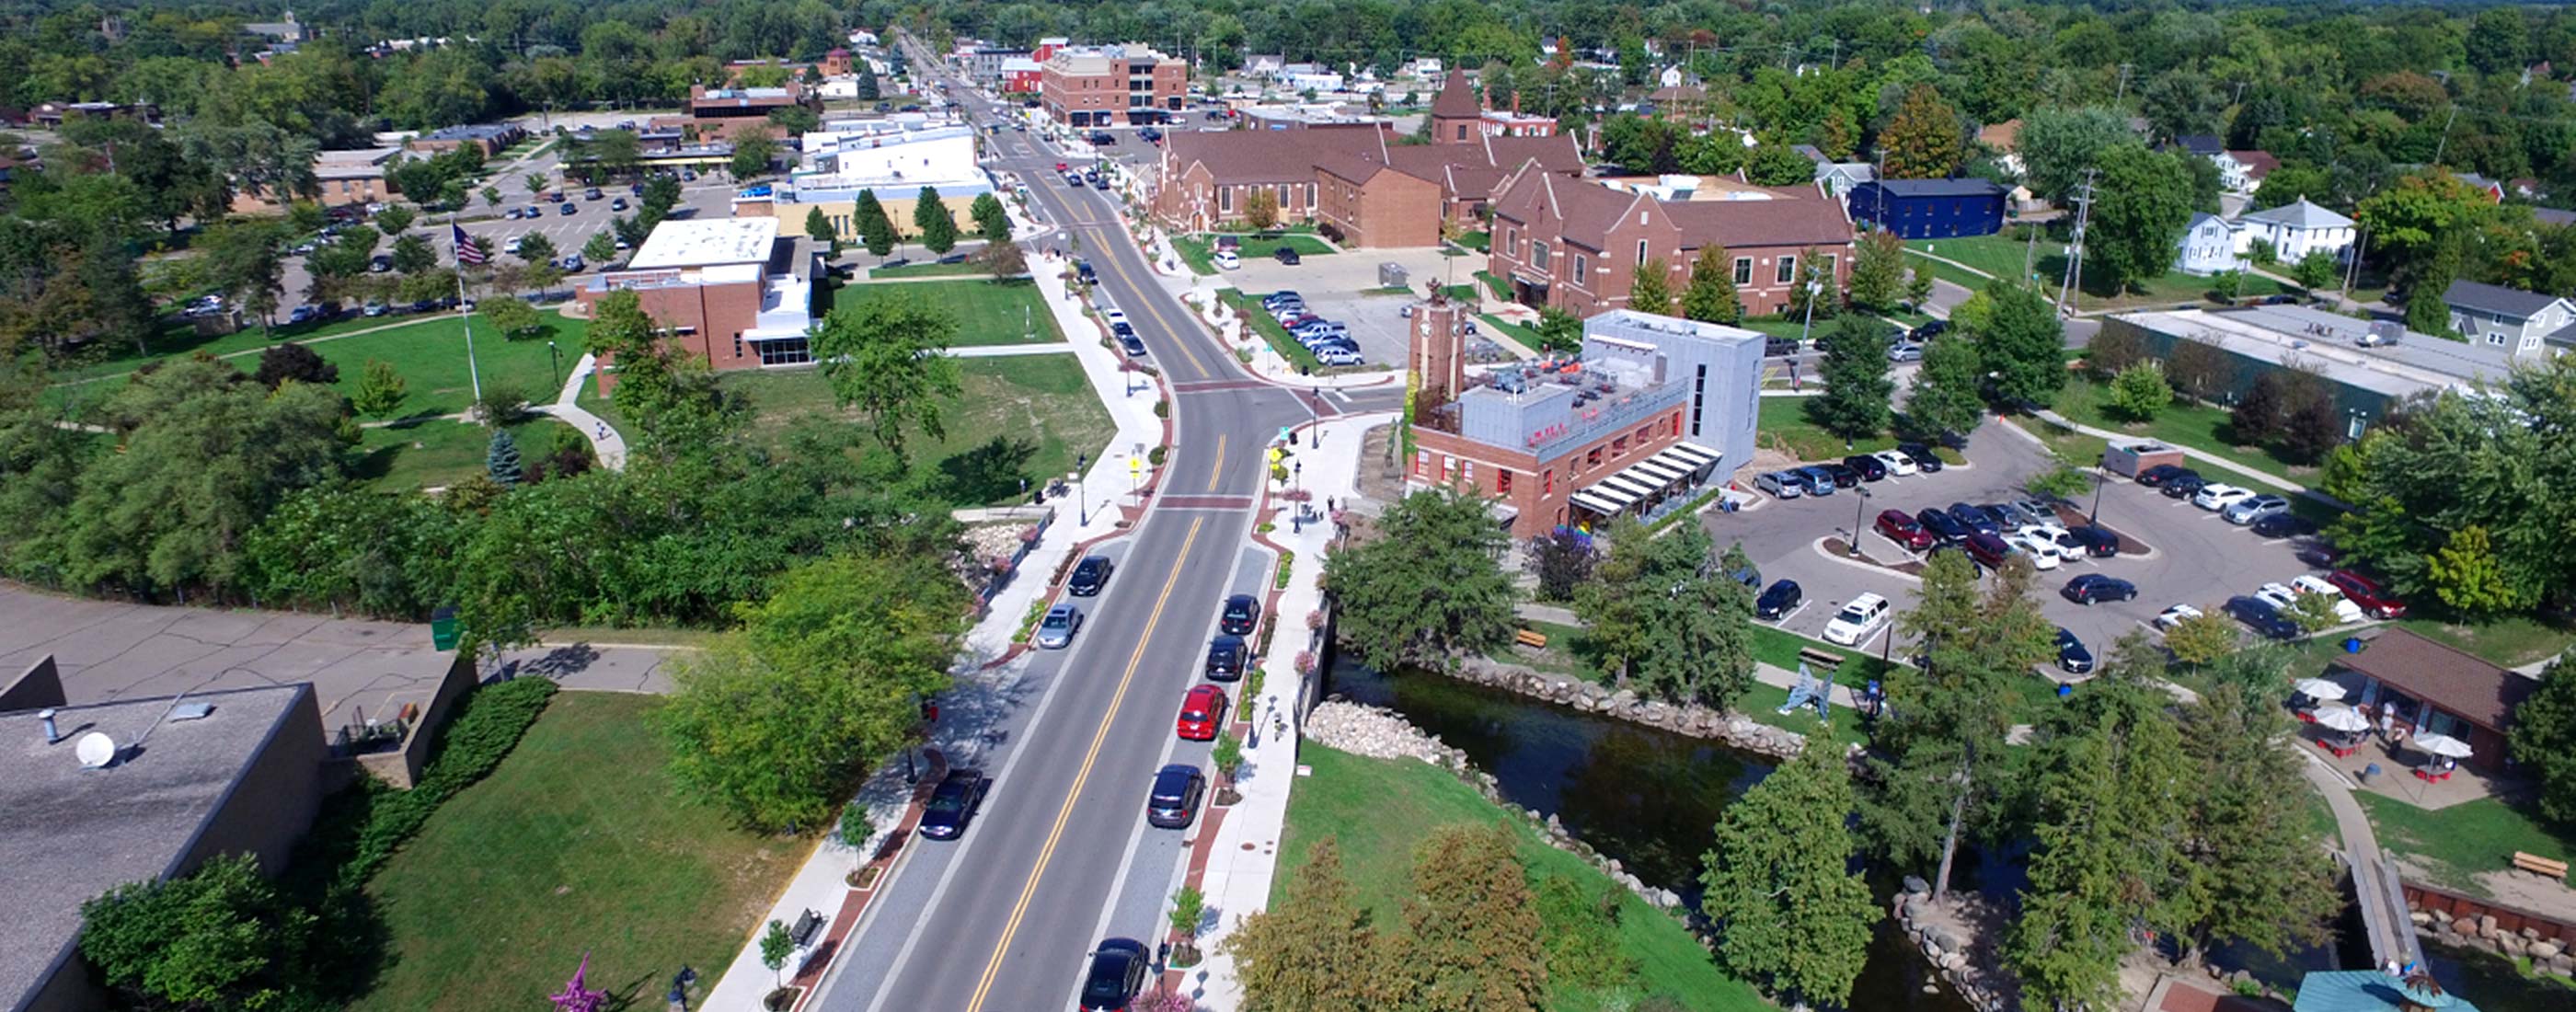 An aerial view of Fenton, Michigan’s downtown streetscape and road rehabilitation project, led by OHM Advisors.